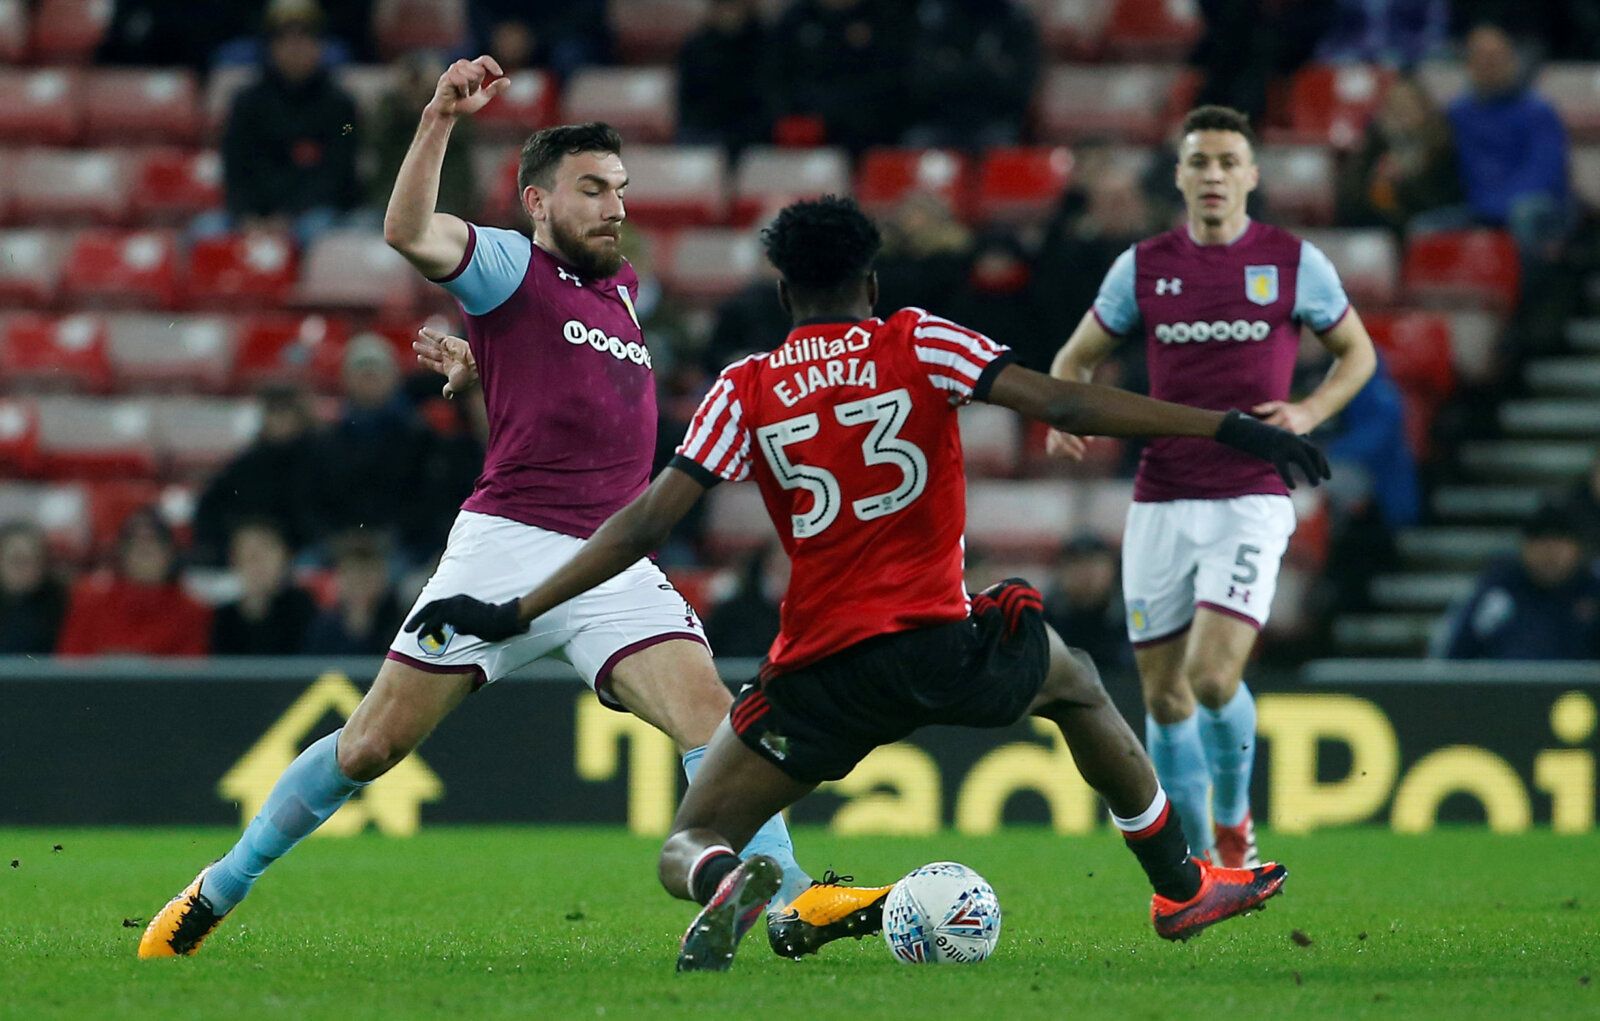 Soccer Football - Championship - Sunderland vs Aston Villa - Stadium of Light, Sunderland, Britain - March 6, 2018   Aston Villa's Robert Snodgrass (L) in action with Sunderland's Ovie Ejaria   Action Images/Craig Brough    EDITORIAL USE ONLY. No use with unauthorized audio, video, data, fixture lists, club/league logos or 